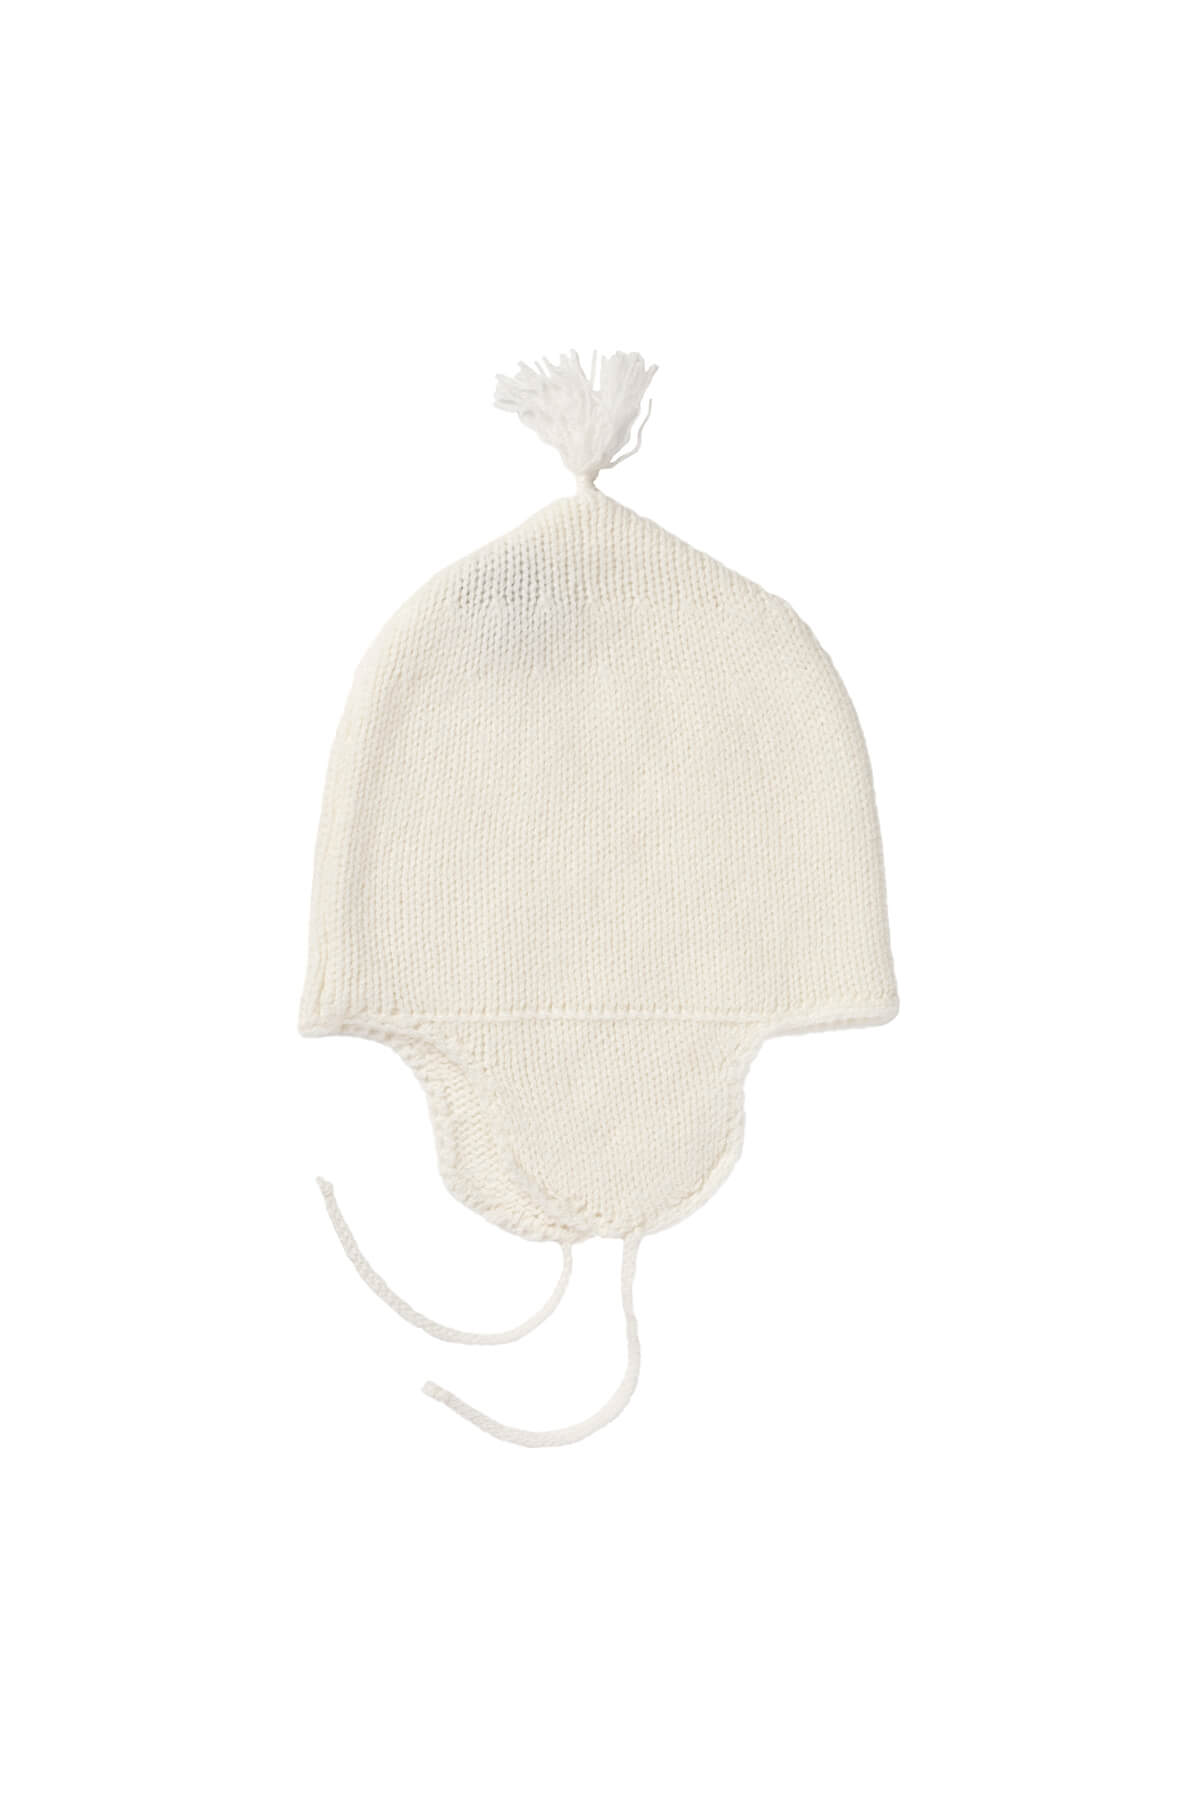 Johnstons of Elgin’s Baby's 1st Cashmere Accessories Gift Set with White Cashmere Baby Hat on a white background AW21GIFTSET20A